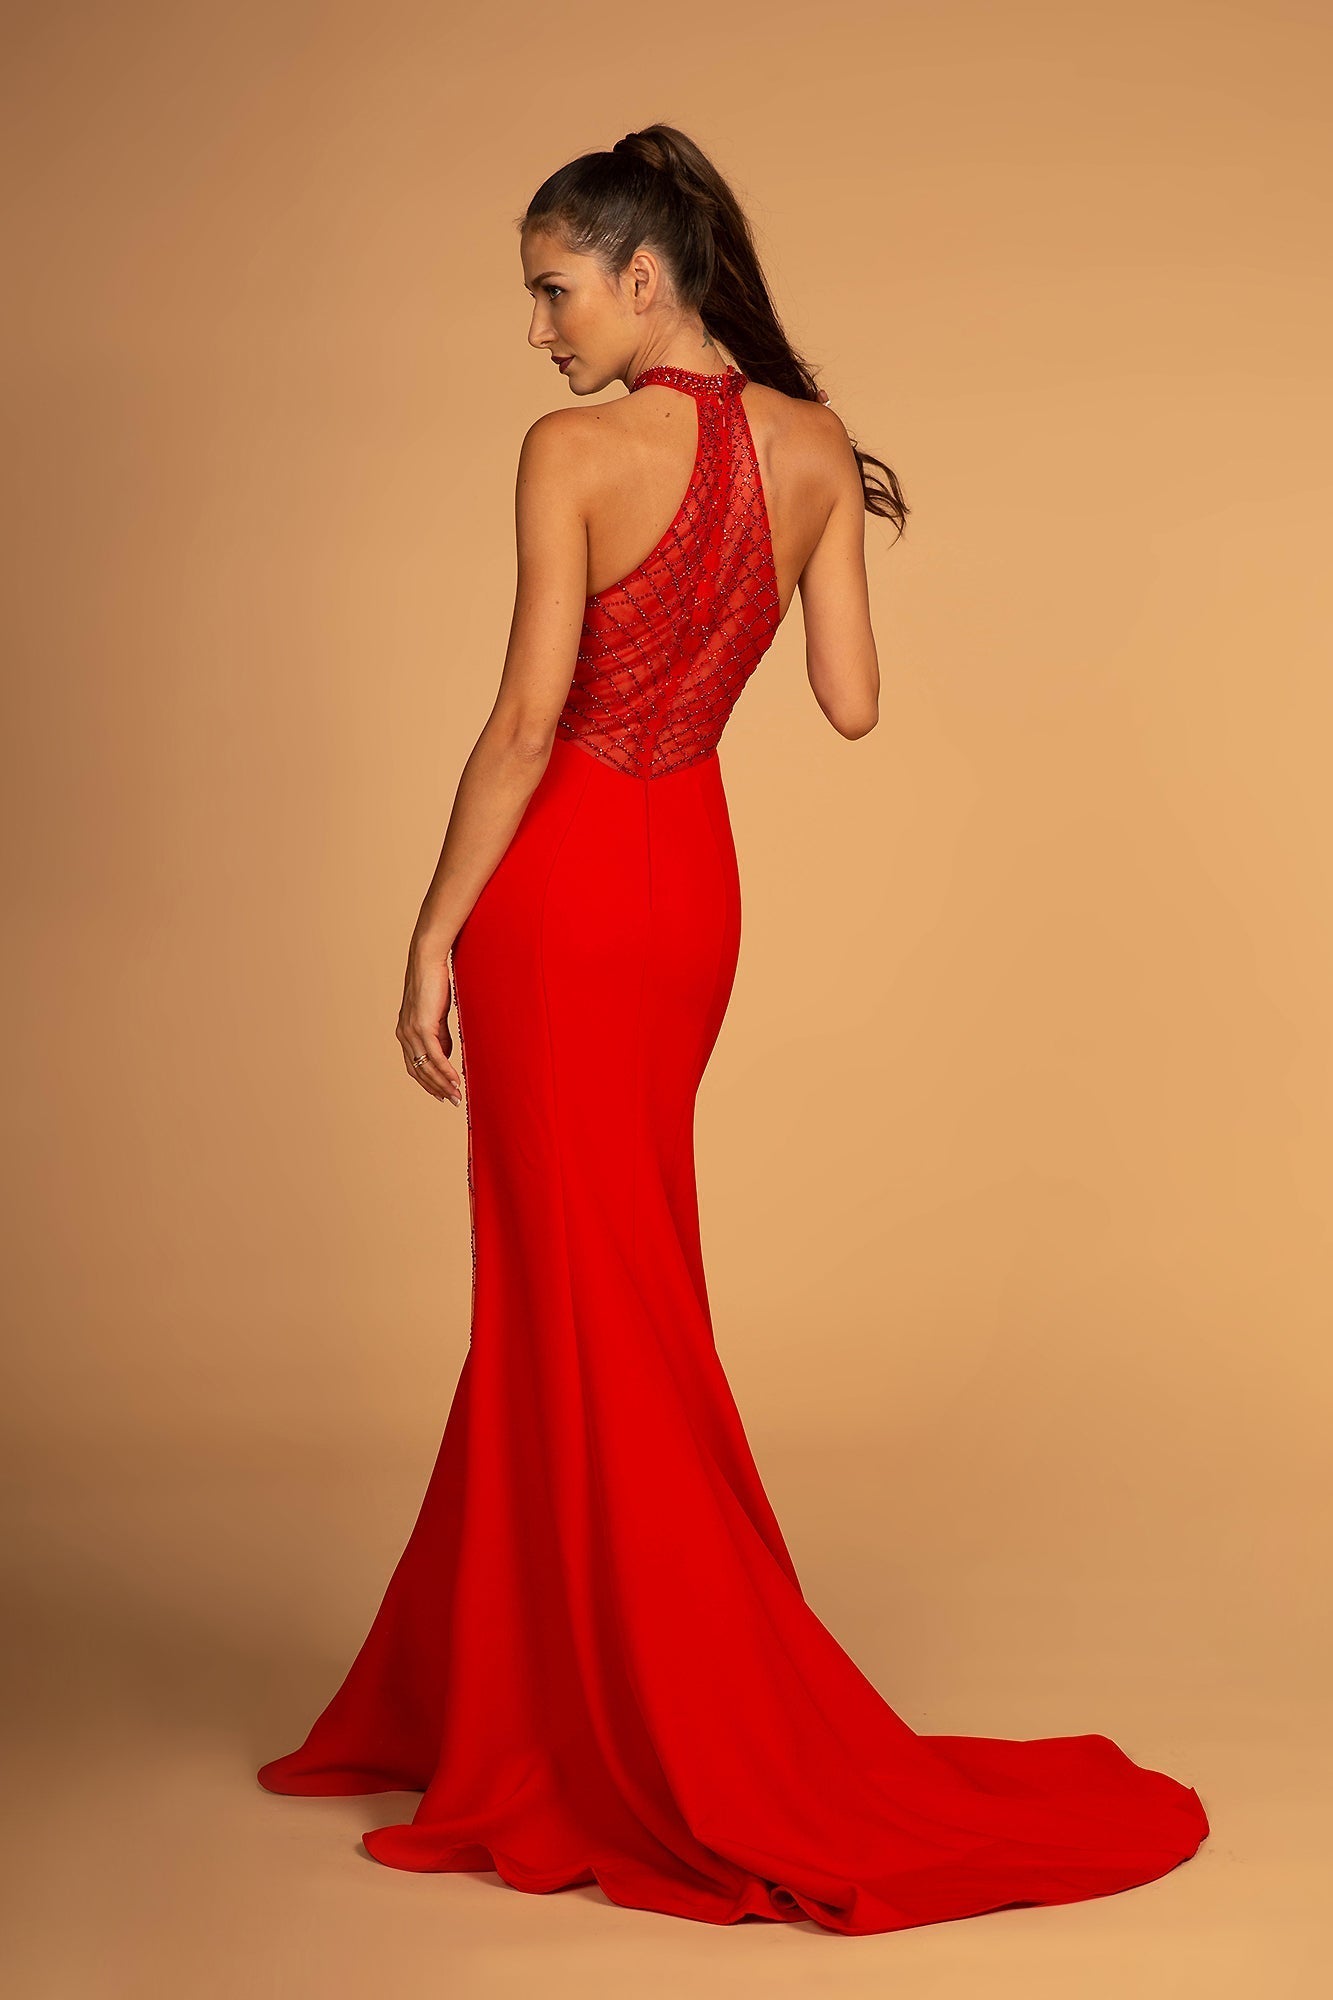 Halter Neck Fitted Mermaid Jersey Dress GLGL2640 Elsy Style PROM